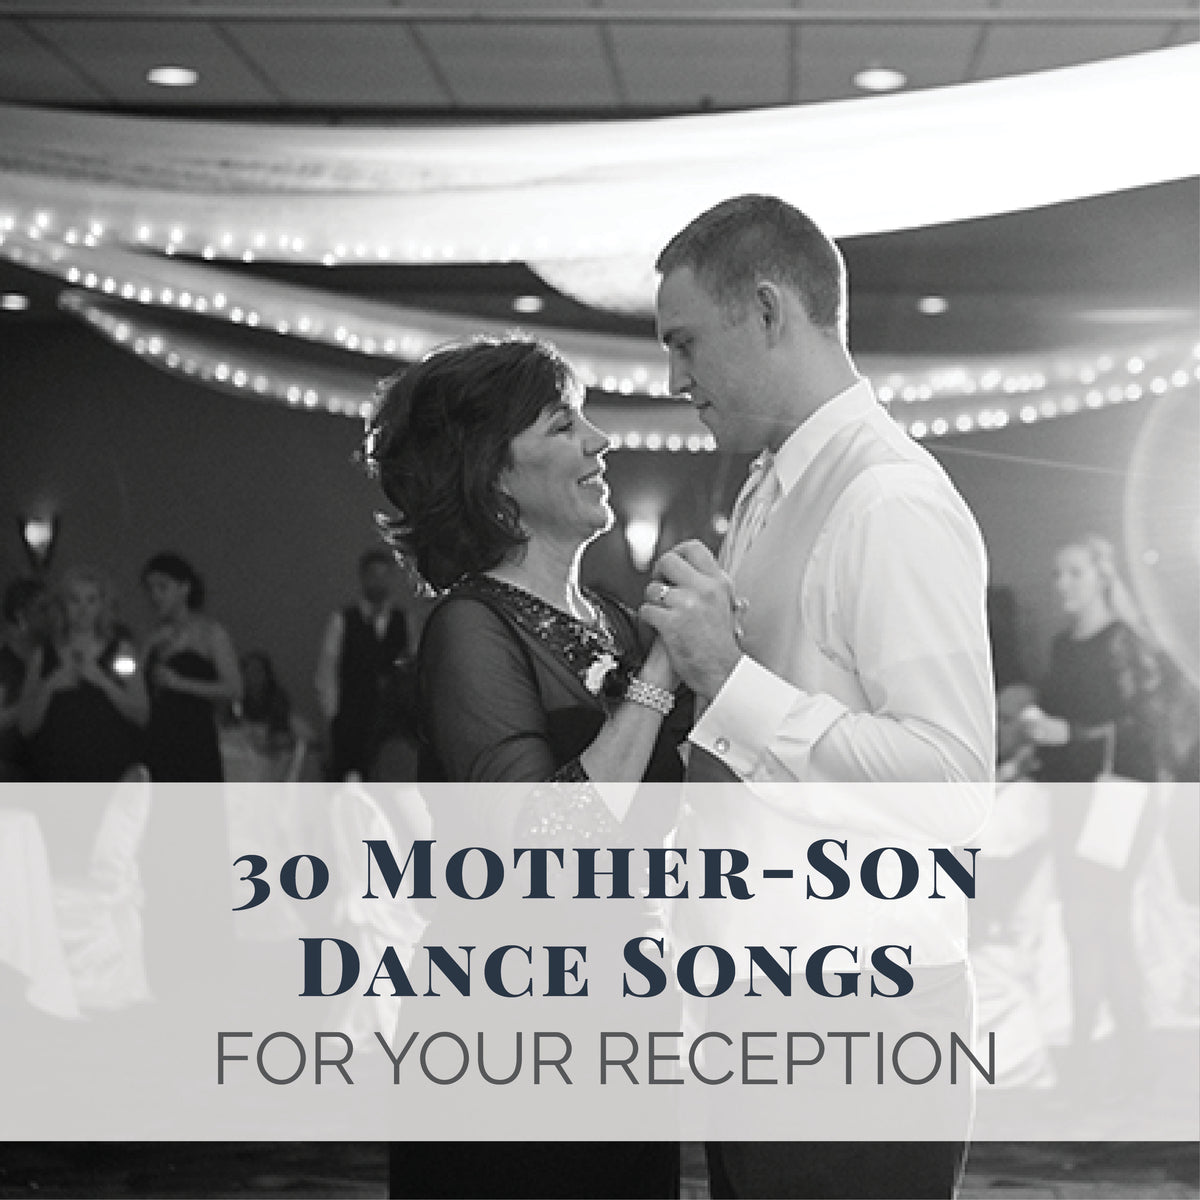 30 MotherSon Dance Songs for Your Wedding Reception